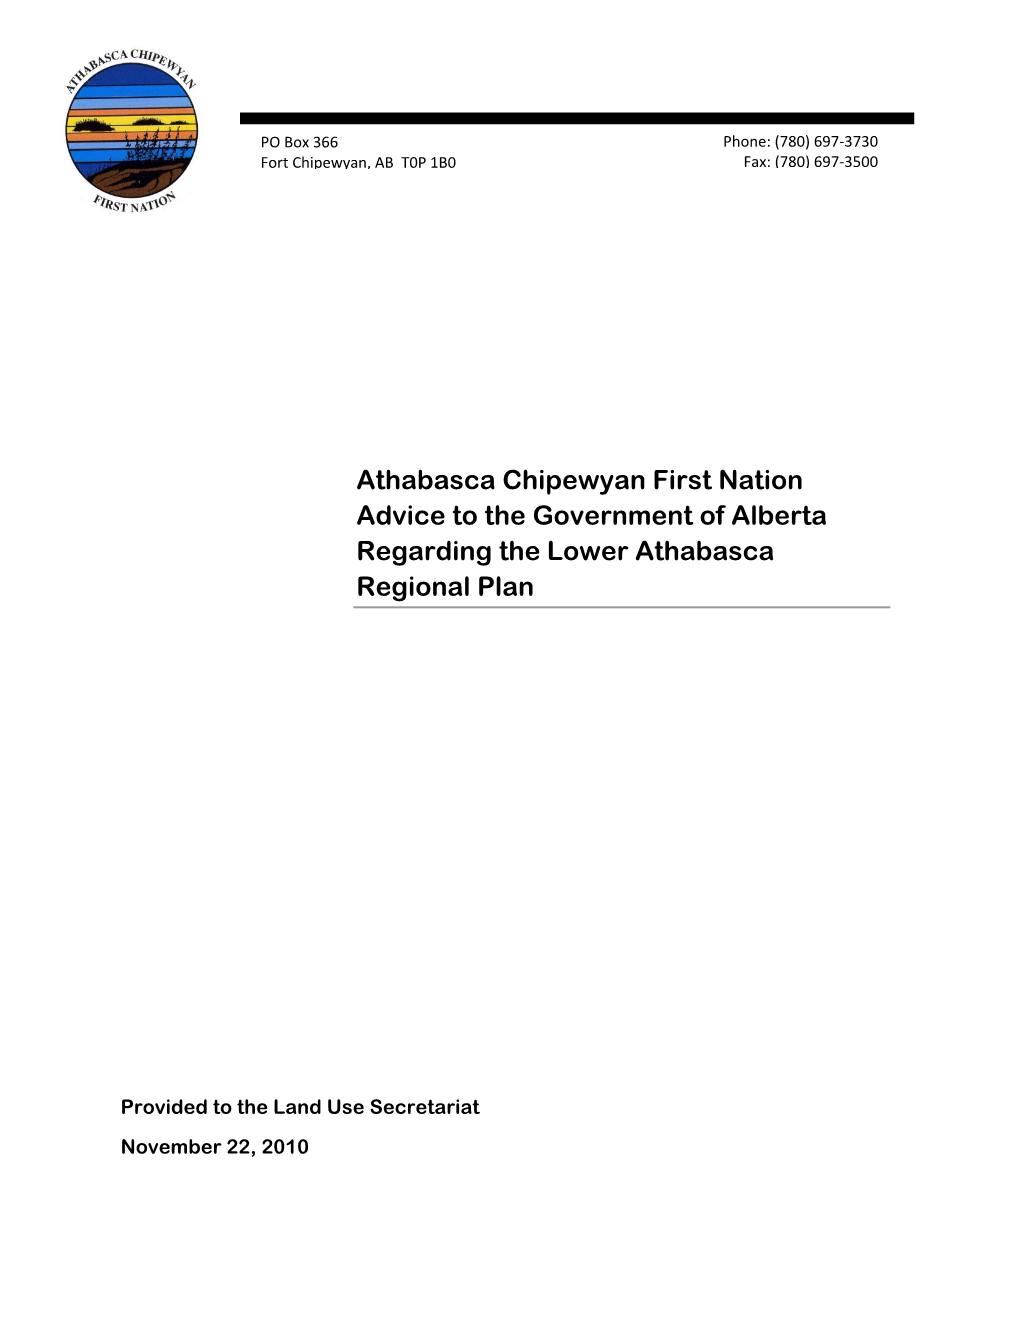 Athabasca Chipewyan First Nation Advice to the Government of Alberta Regarding the Lower Athabasca Regional Plan